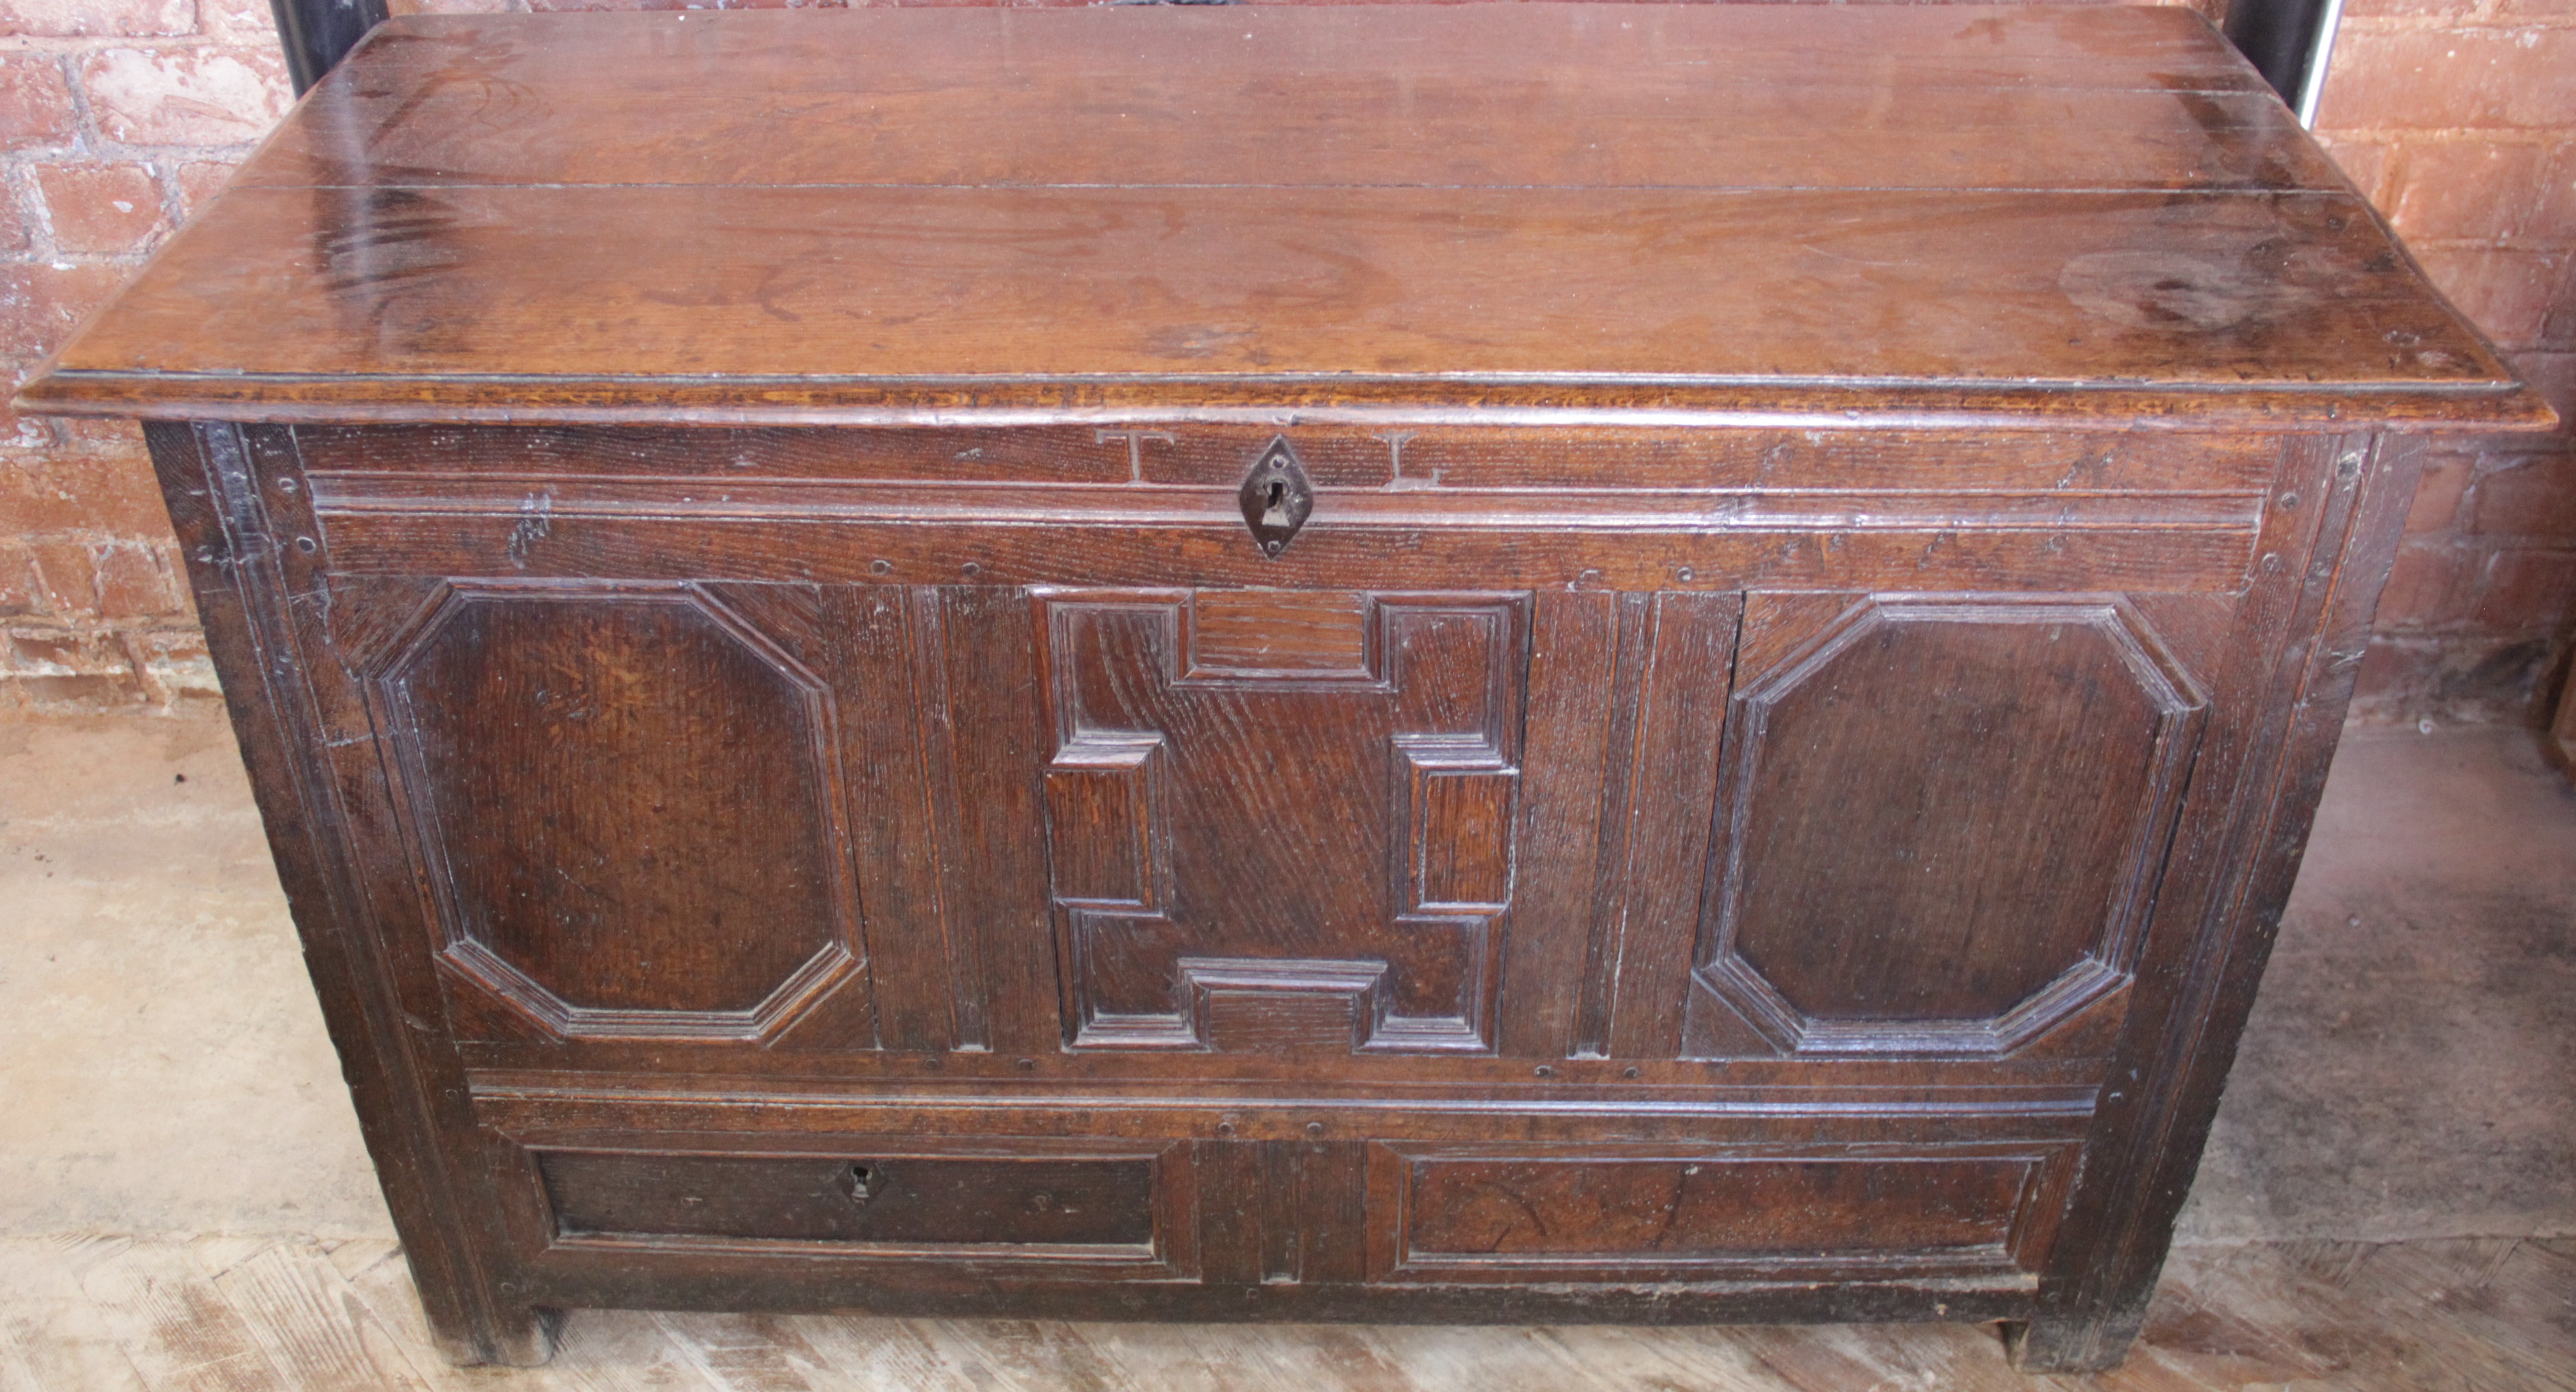 An 18th century oak coffer, with fielded panel front